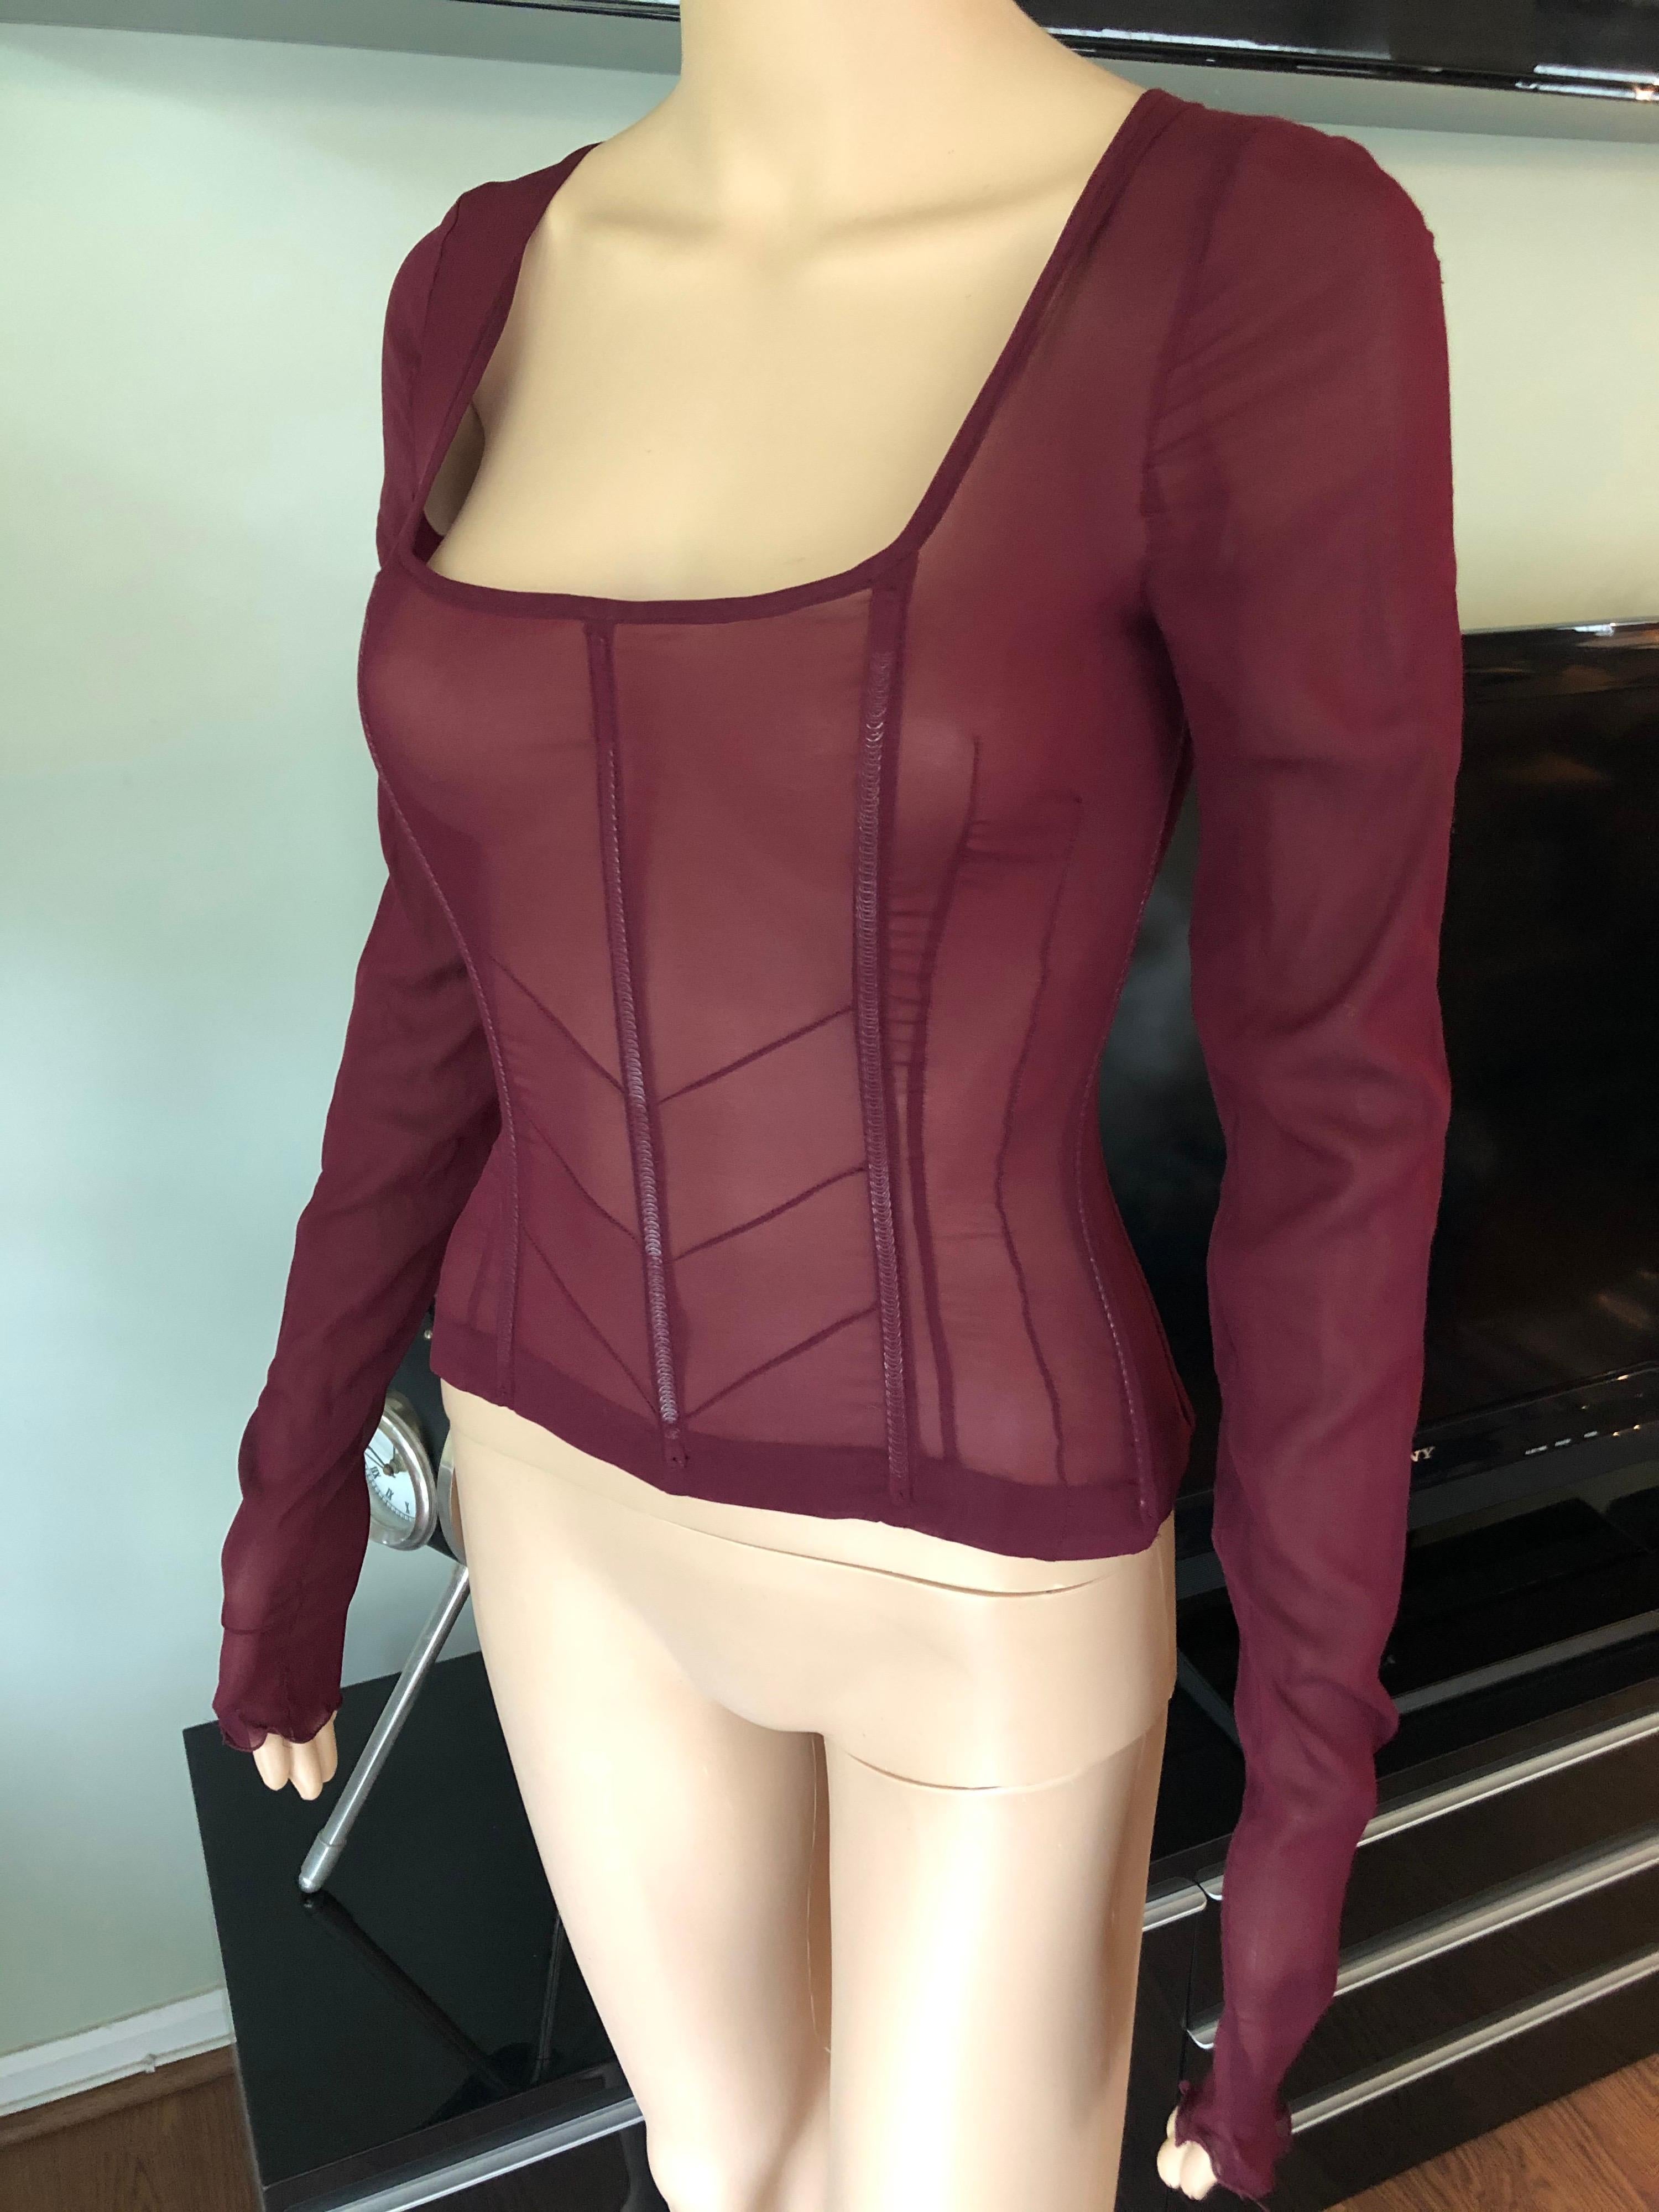 Burgundy Dolce & Gabbana sheer silk top featuring sexy neckline, long sleeves, structured bodice and concealed zip closure at back. 
Condition: Unworn Includes Attached Tags
